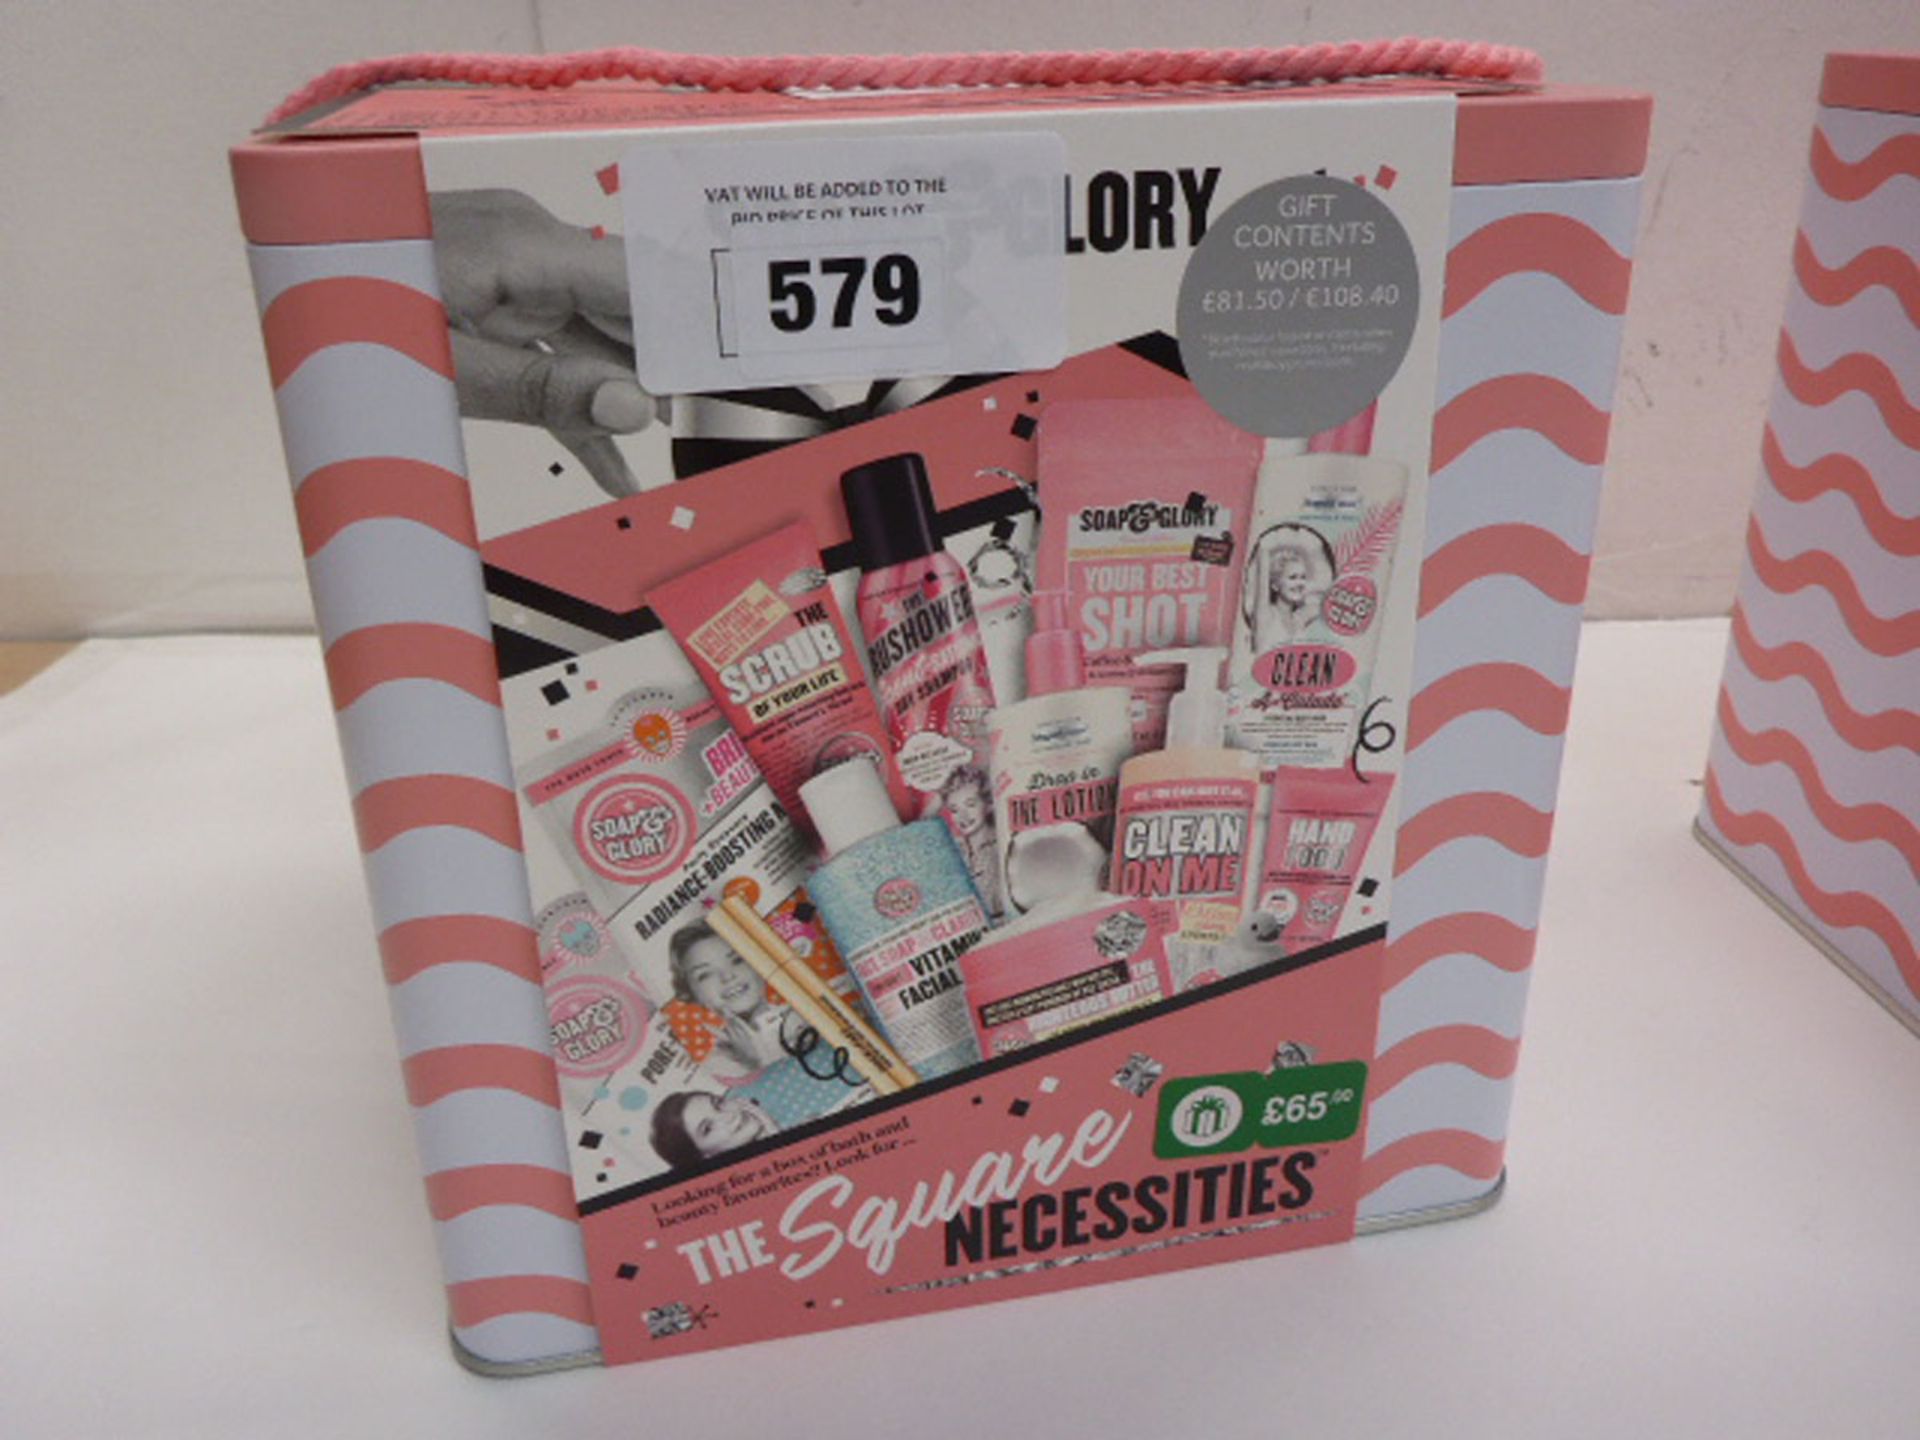 Soap & Glory 'The Square Necessities' gift box set